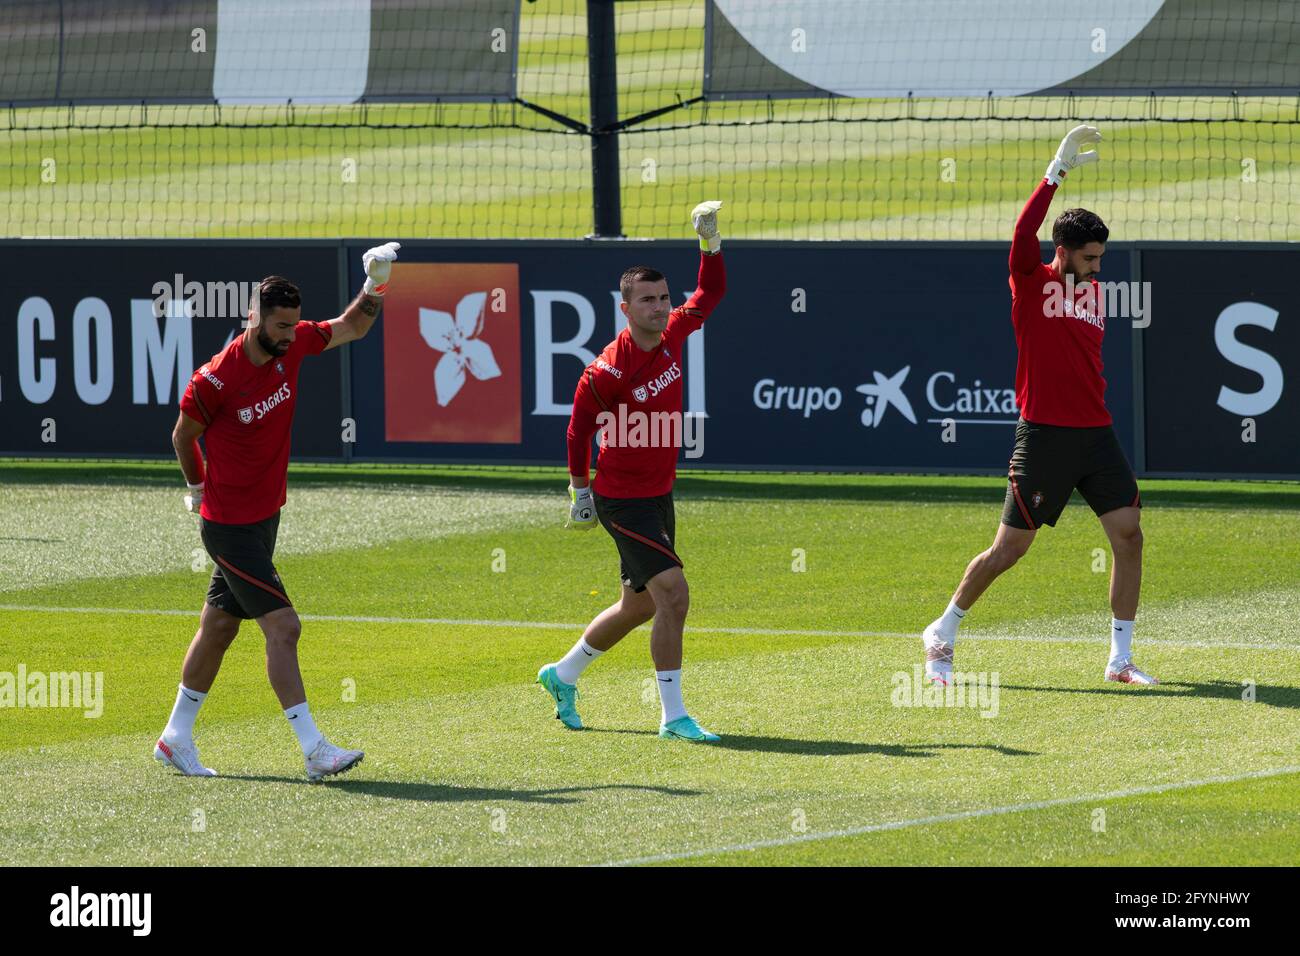 Oeiras, Portugal. 29th May, 2021. Goalkeepers Rui Patricio (L), Anthony Lopes (C) and Rui Silva (R) of Portugal seen in action during the training session at Cidade do Futebol training ground in Oeiras.Portugal football team trains before competing in the European football championship - EURO 2020 - scheduled to start on June 11th. Credit: SOPA Images Limited/Alamy Live News Stock Photo